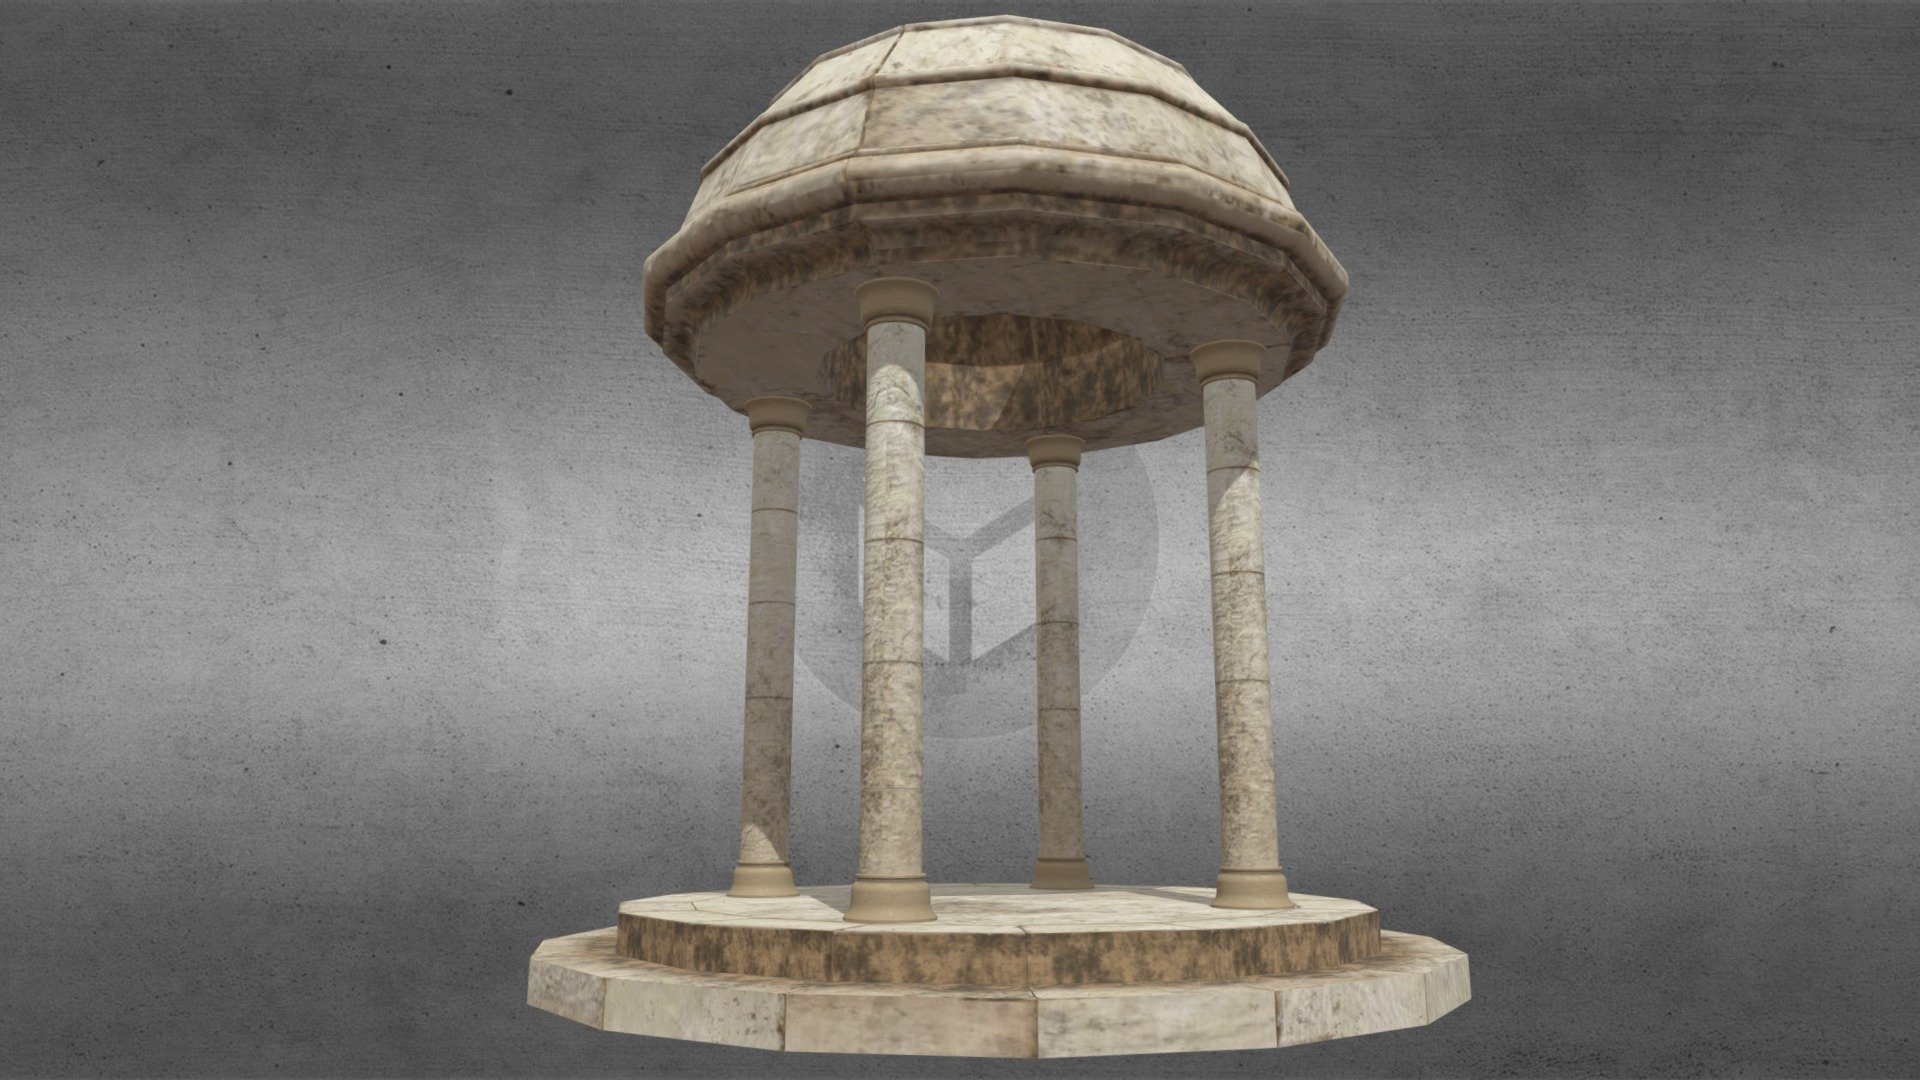 Column. Stone dome. Stone column with stone base.
Hemispherical dome of carved stone
Dome carved from stone
Four columns for a stone dome
Stone staircase with columns and dome
Round shape of carved stone
Stone carousel with stairs
The stone dome is on four columns
Circular carved stone columns
White stone cladding
A stone dome with an opening in the ceiling
Stone monument in the center of the city
Garden monument
Stone monument for malls
Stone monument of ancient construction
Stone monument of the ancient city - Column. Stone dome. With stone base 3d model